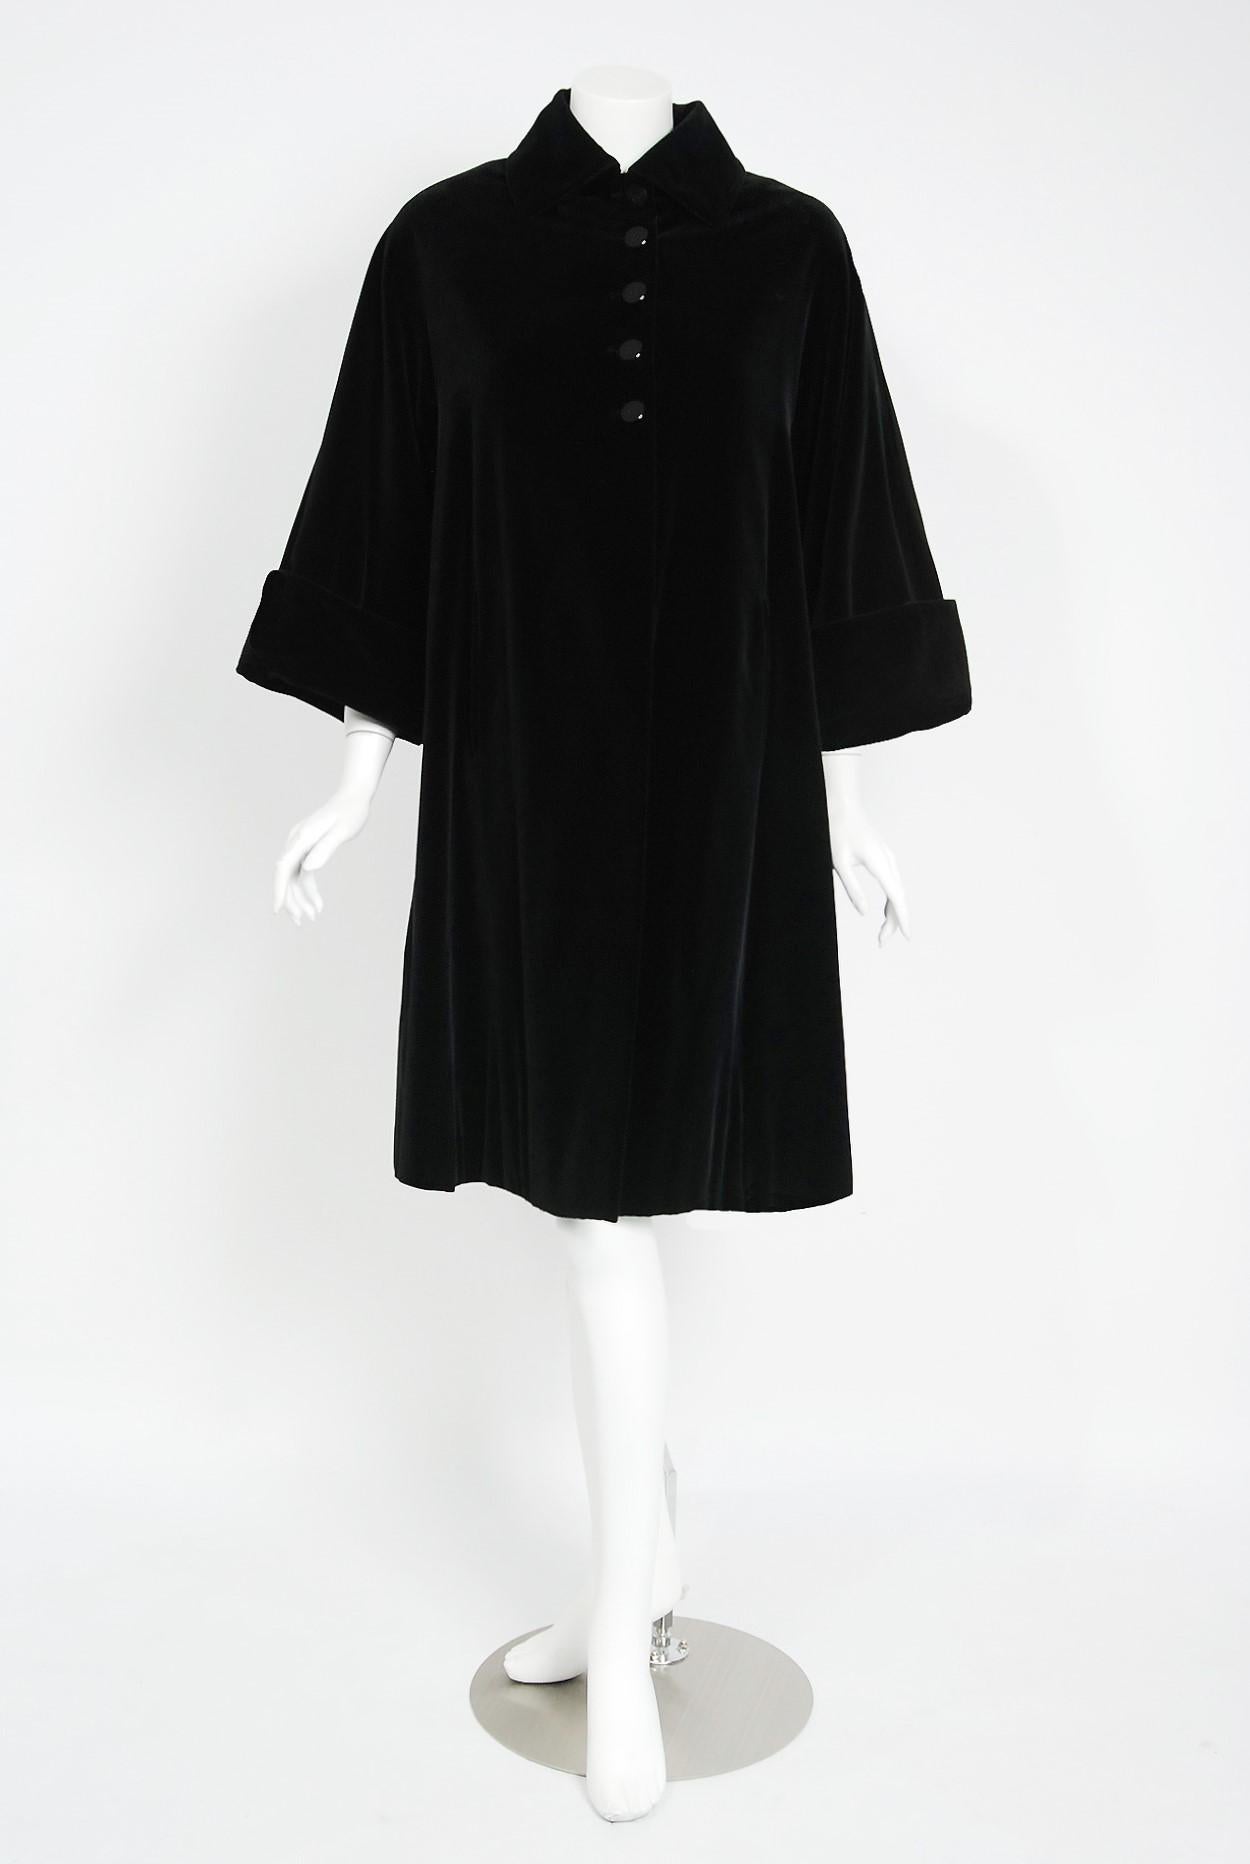 Breathtaking Pierre Balmain Paris black velvet swing coat dating back to his documented 1951 Fall/Winter collection. Pierre Balmain worked under Robert Pigiuet, Molyneux, and Lucian Lelong, where he worked closely with Christian Dior. In 1945 is